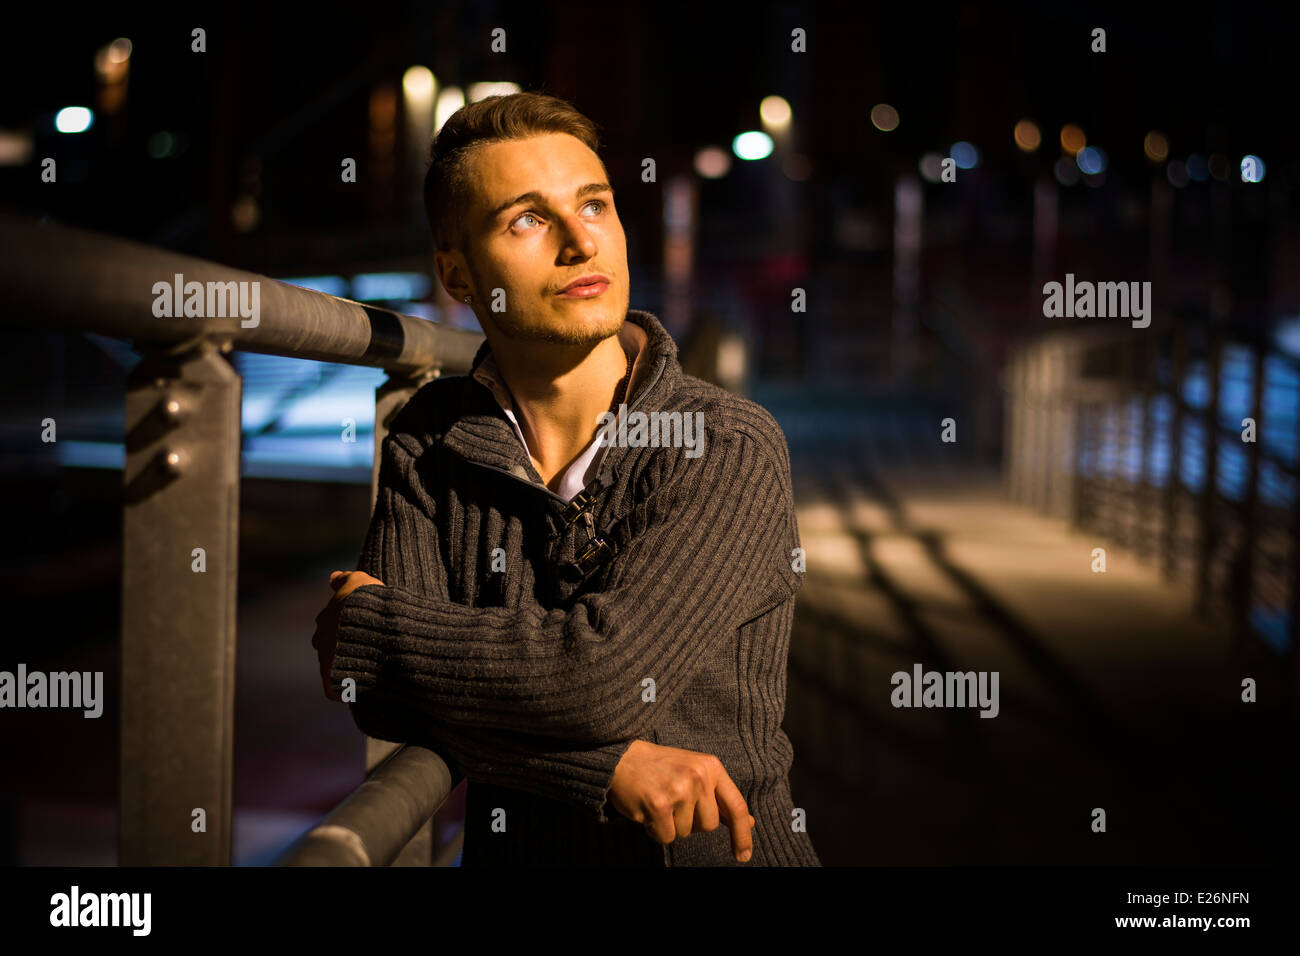 Handsome blond young man alone in urban setting, leaning against handrail, night shot Stock Photo